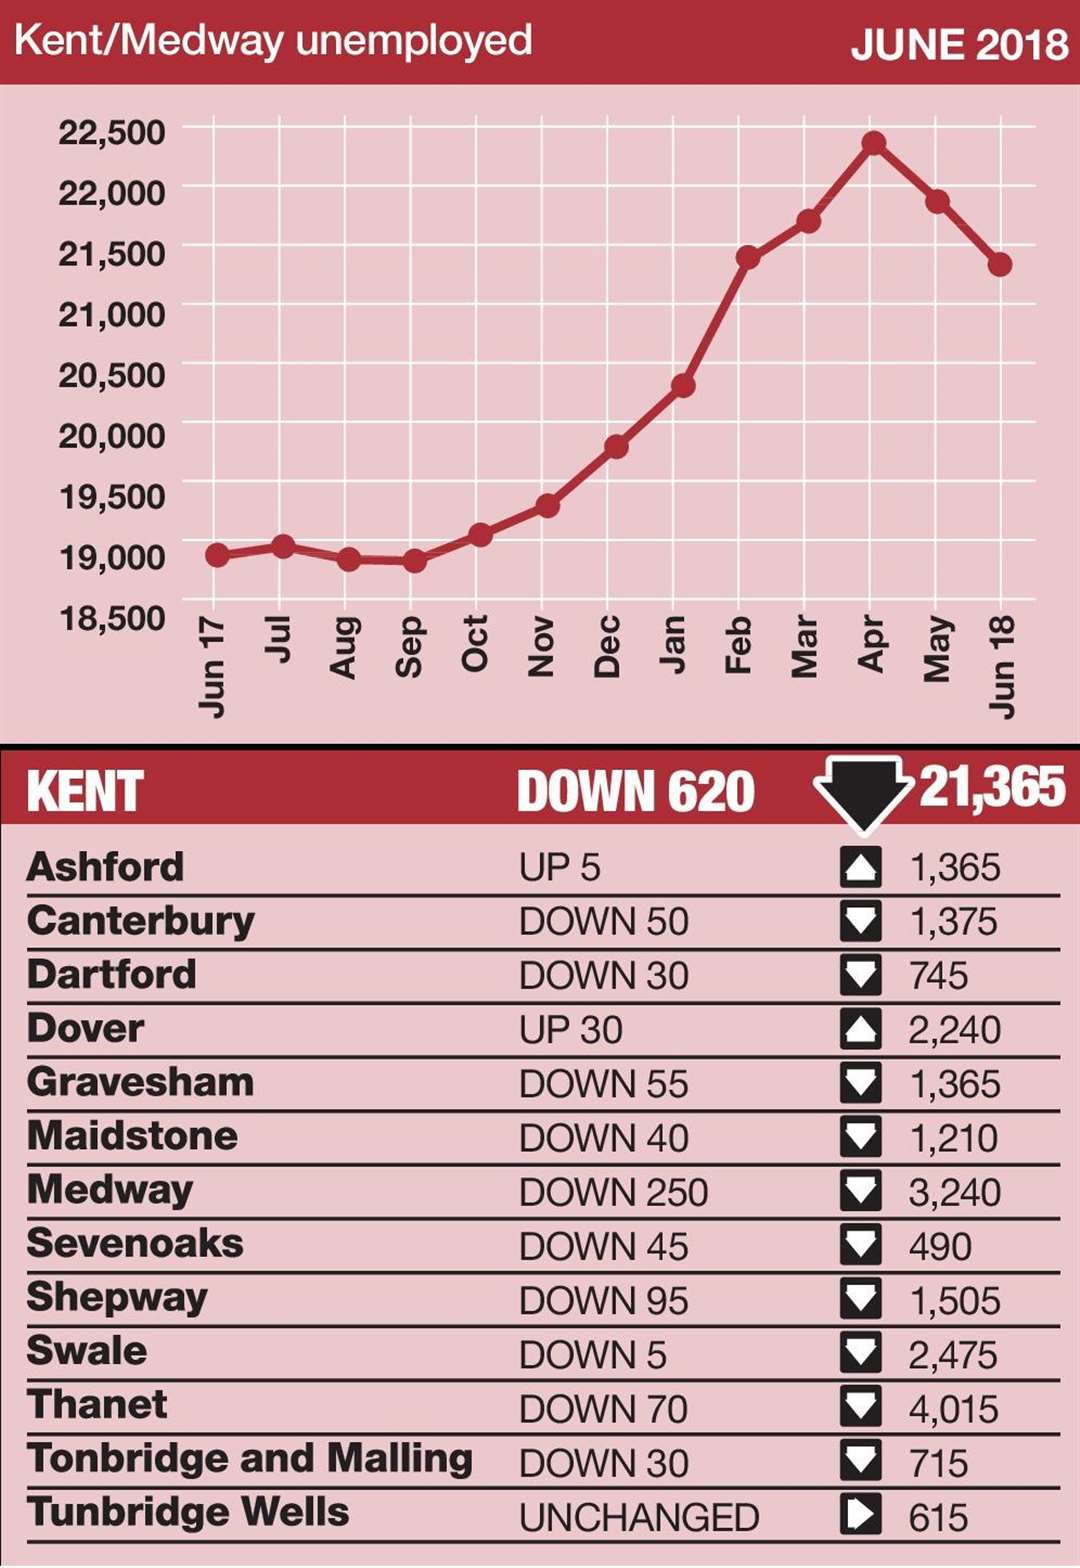 Kent's claimant count fell for the second straight month